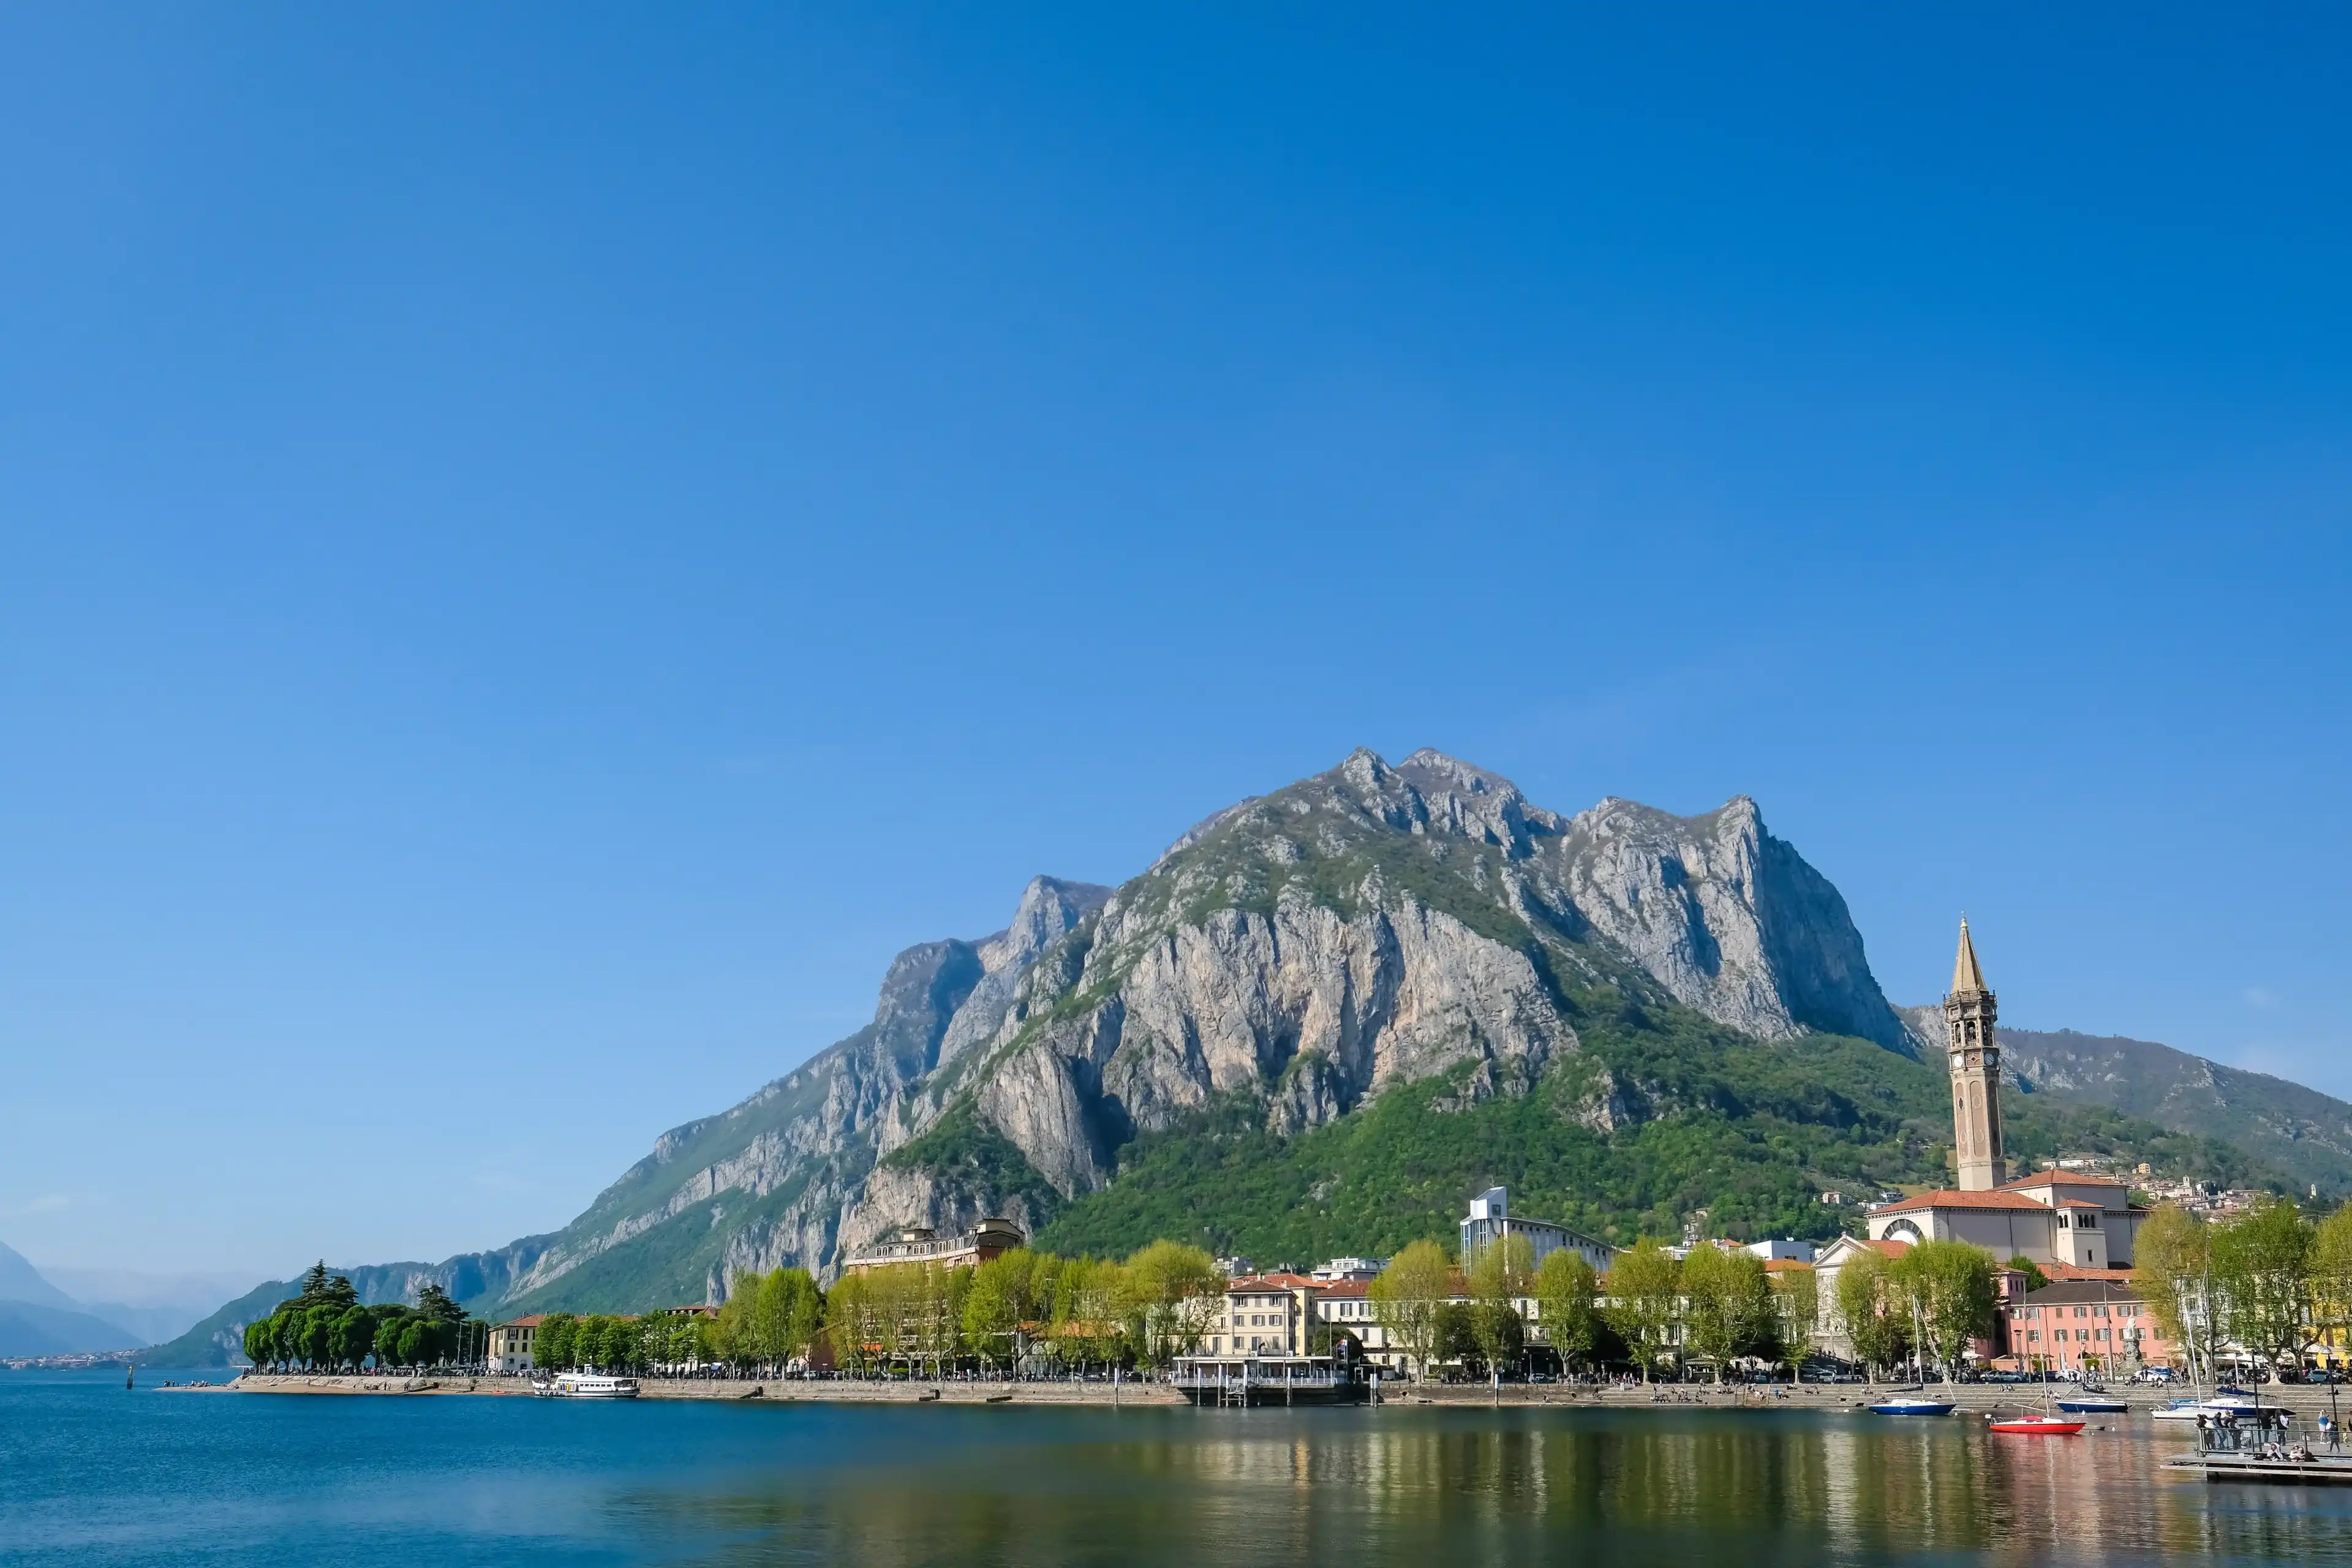 Best Lecco hotels. Cheap hotels in Lecco, Italy